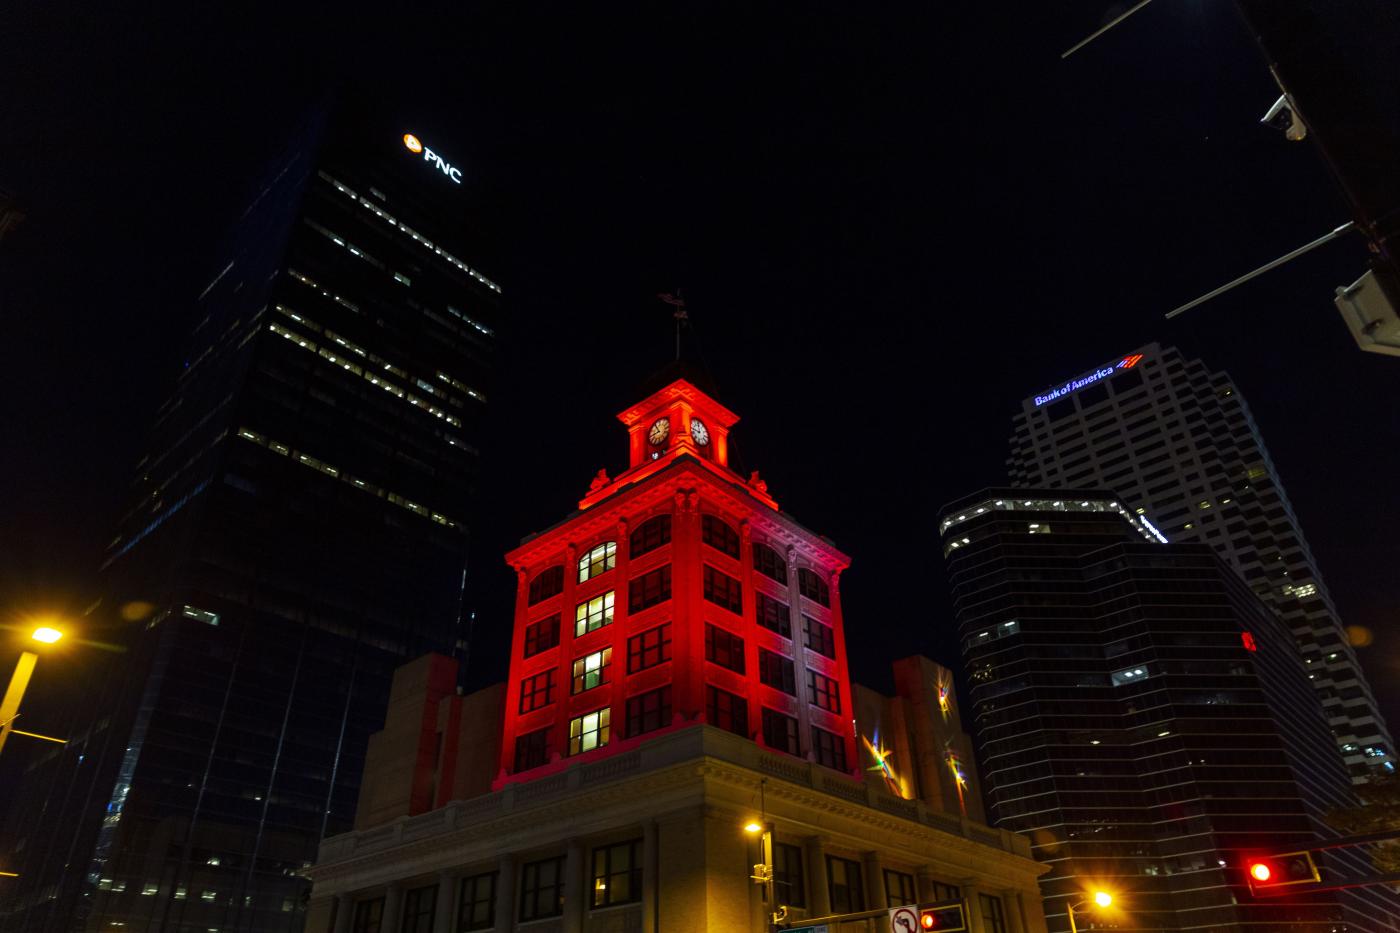 Tampa City Hall in red